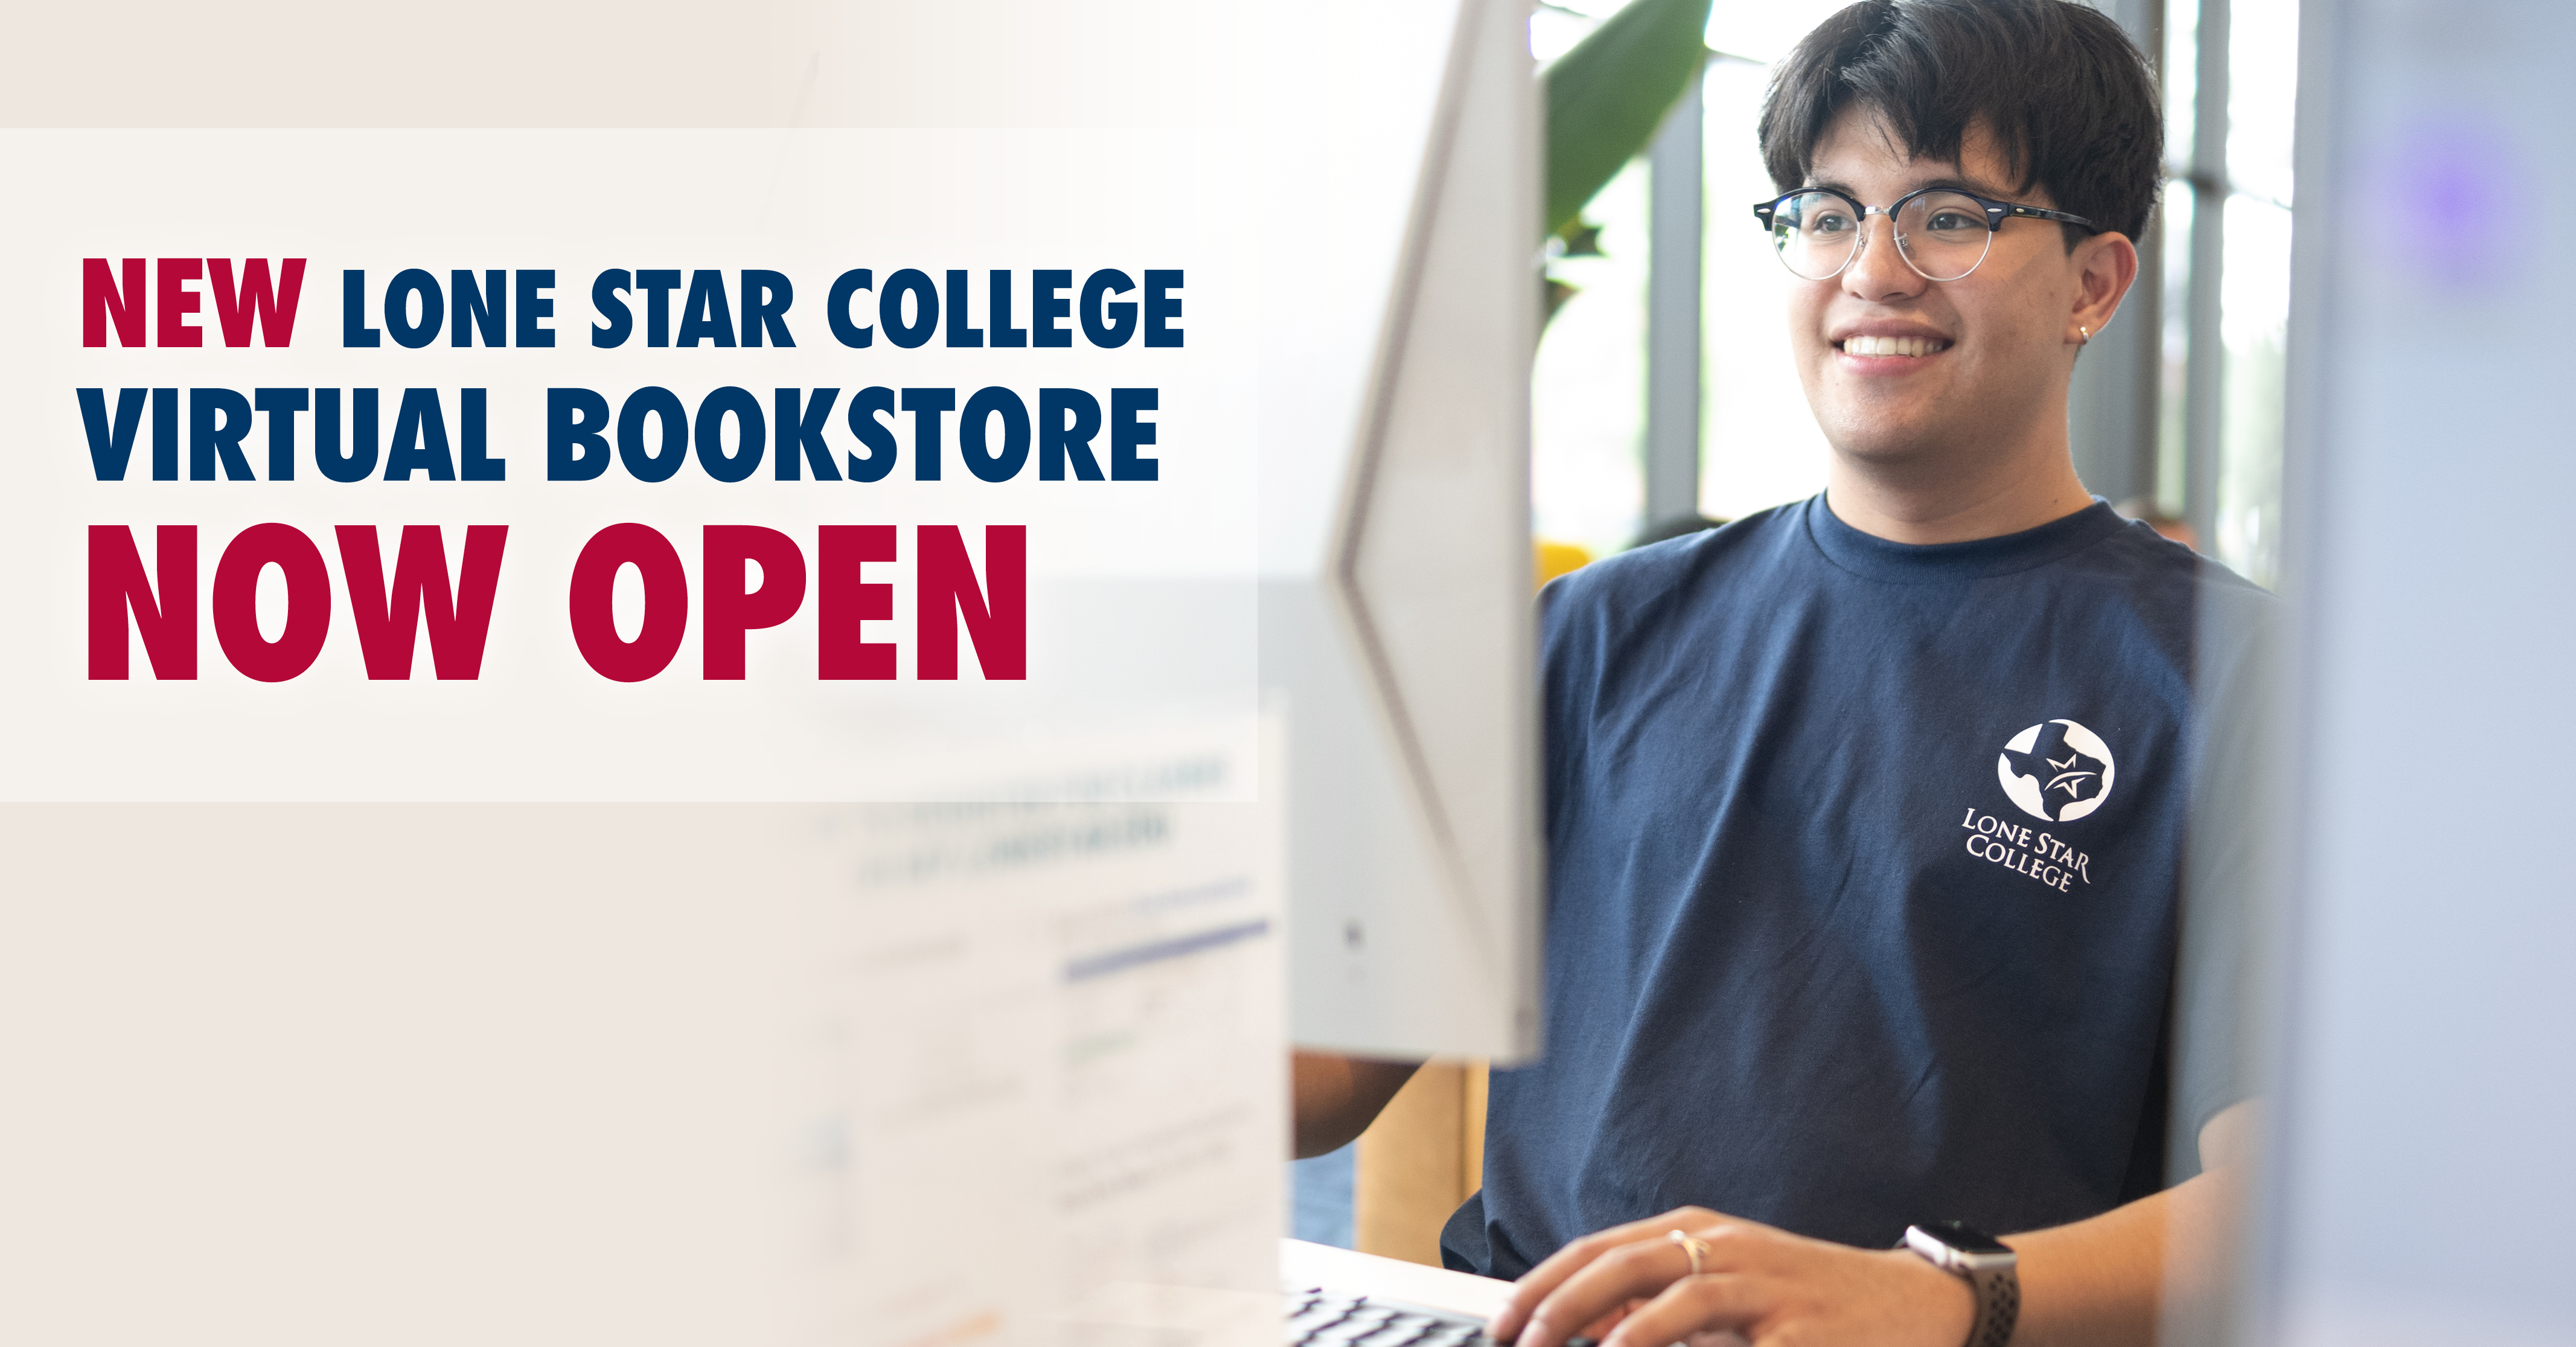 Fall 2023 payment is due on August 5th. Learn more at LoneStar.edu/Payment. Need a payment plan? Learn more at LoneStar.edu/Payment.